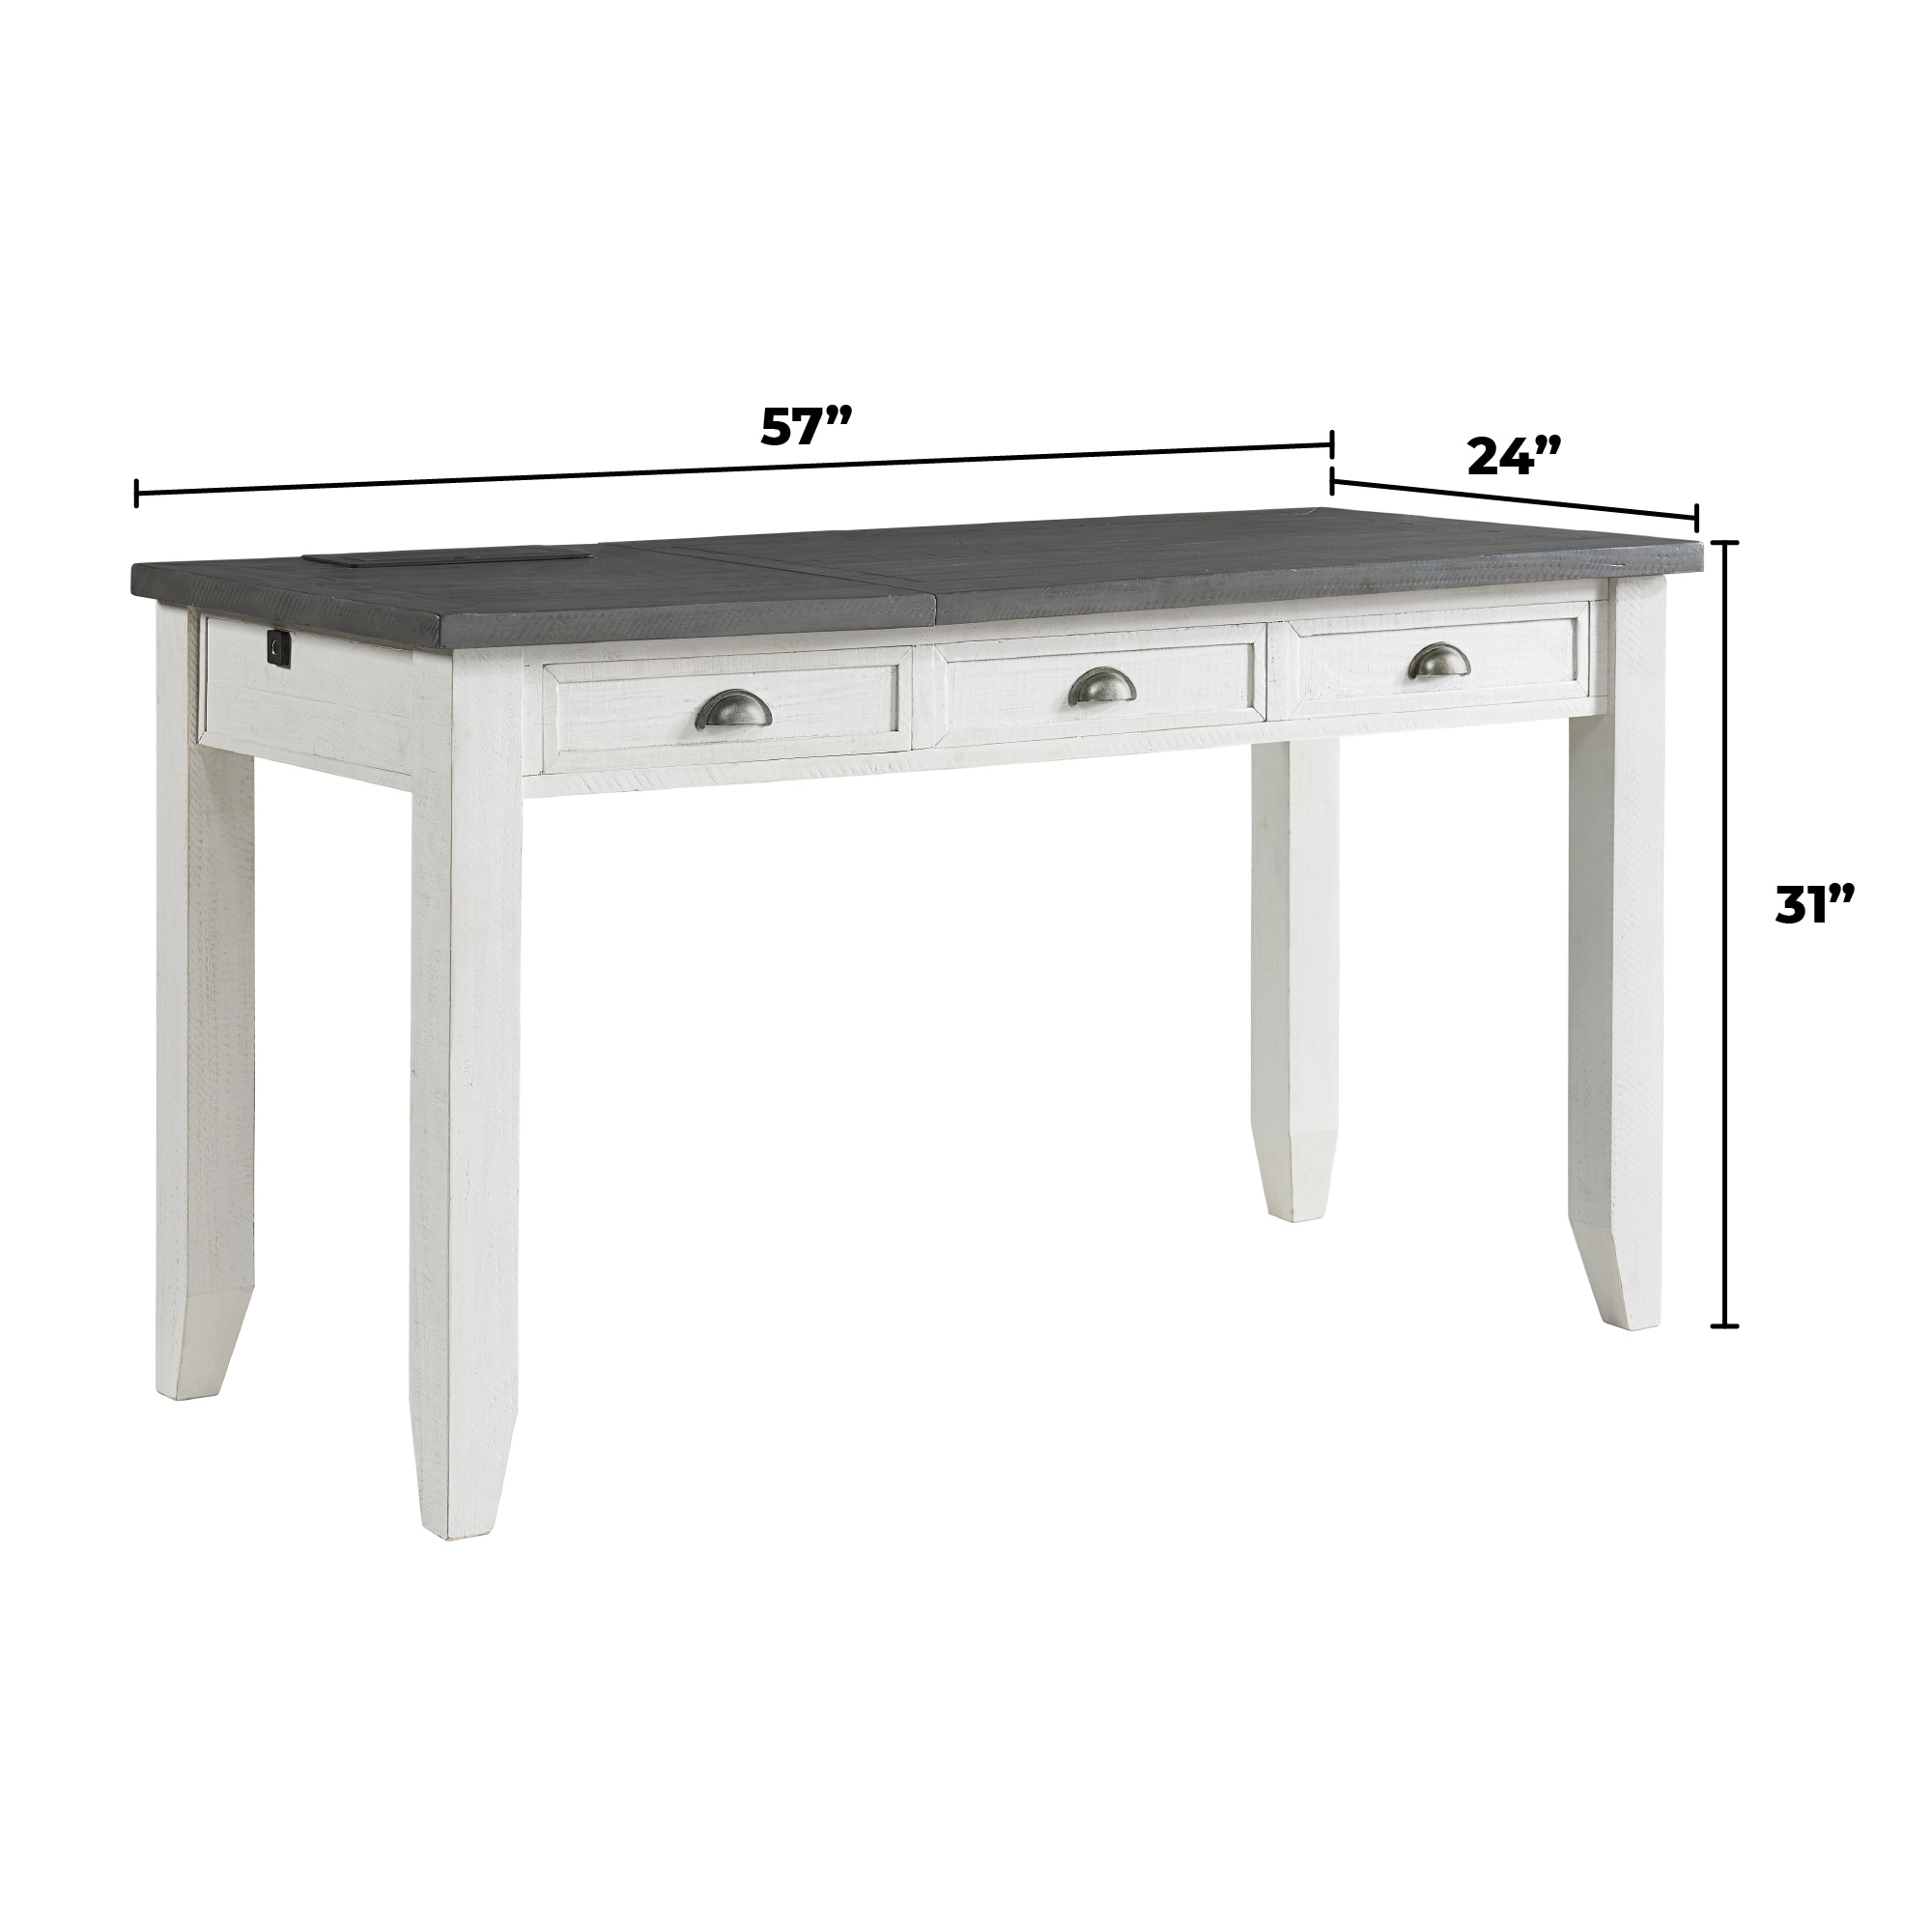 Monterey 57" Lift-Top Desk with Fingerprint Lock White Stain and Grey